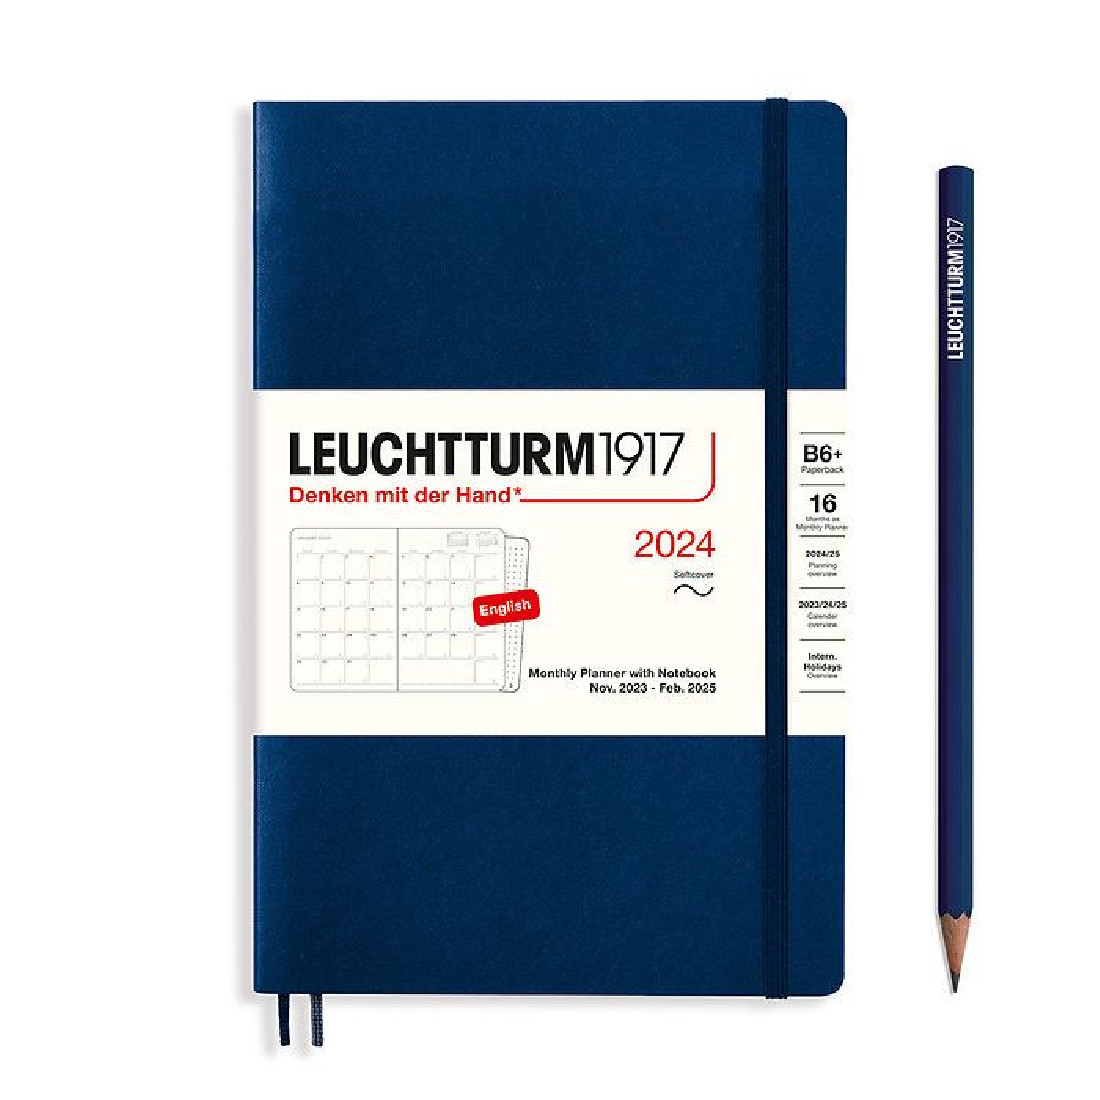 Leuchtturm 1917 Monthly Planner and Notebook 2024 Navy Paperback B6 Plus Soft Cover